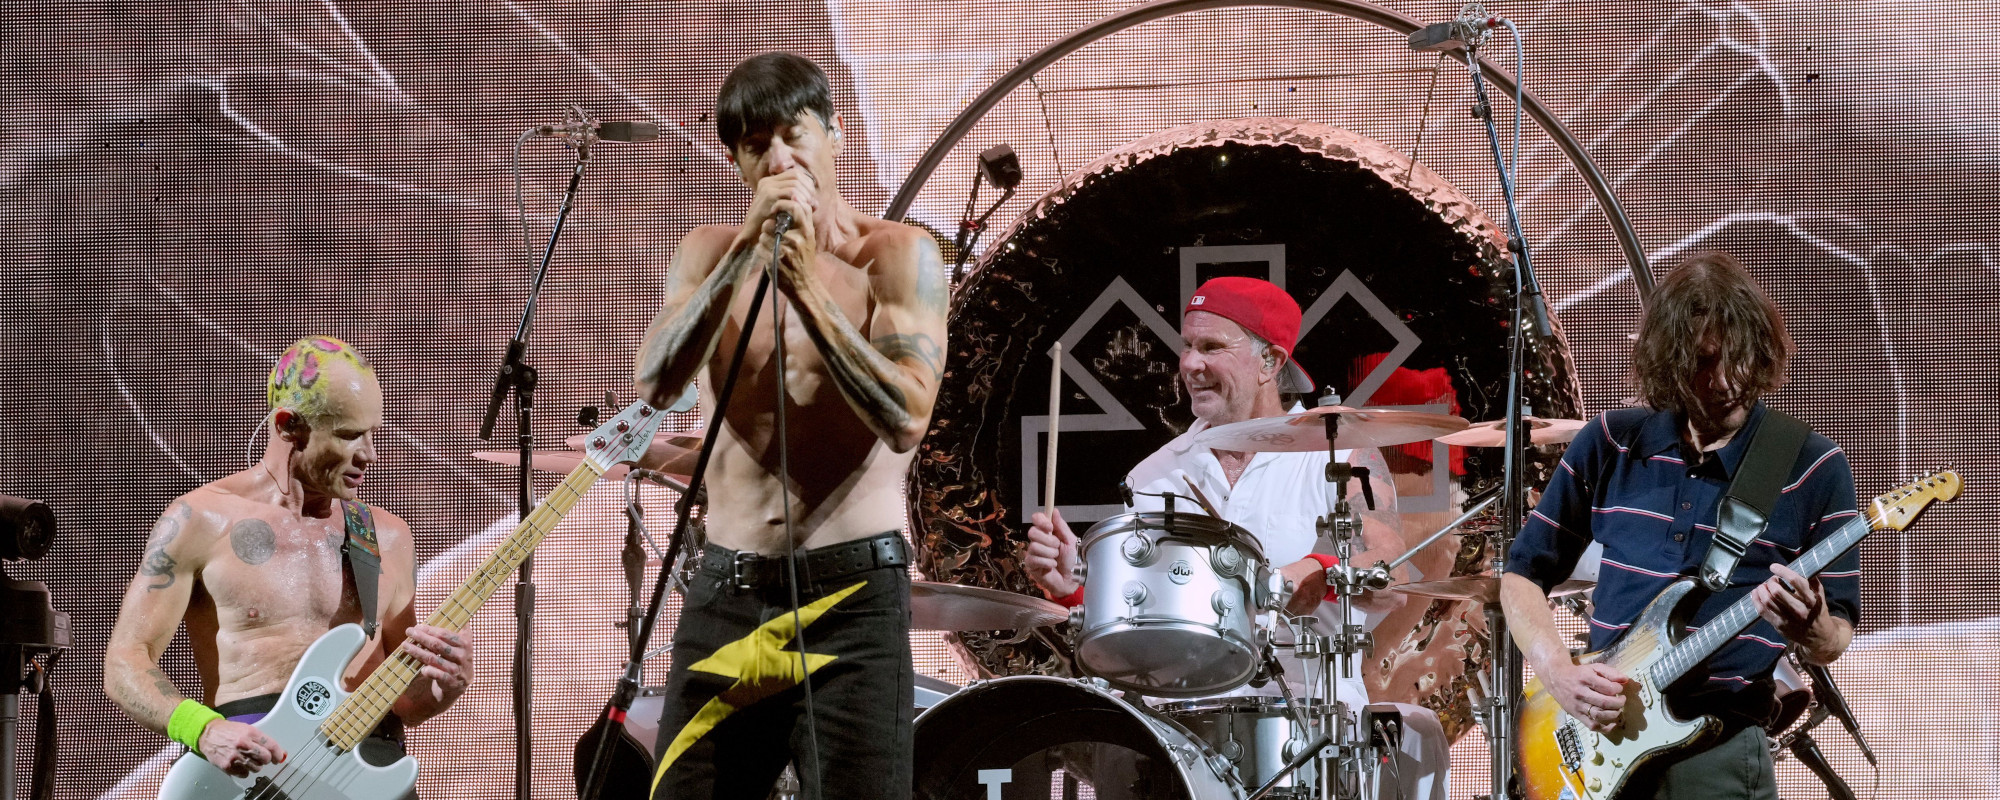 Red Hot Chili Peppers Share New Single, “Tippa My Tongue” Ahead of (Second) New LP ‘Return of the Dream Canteen’